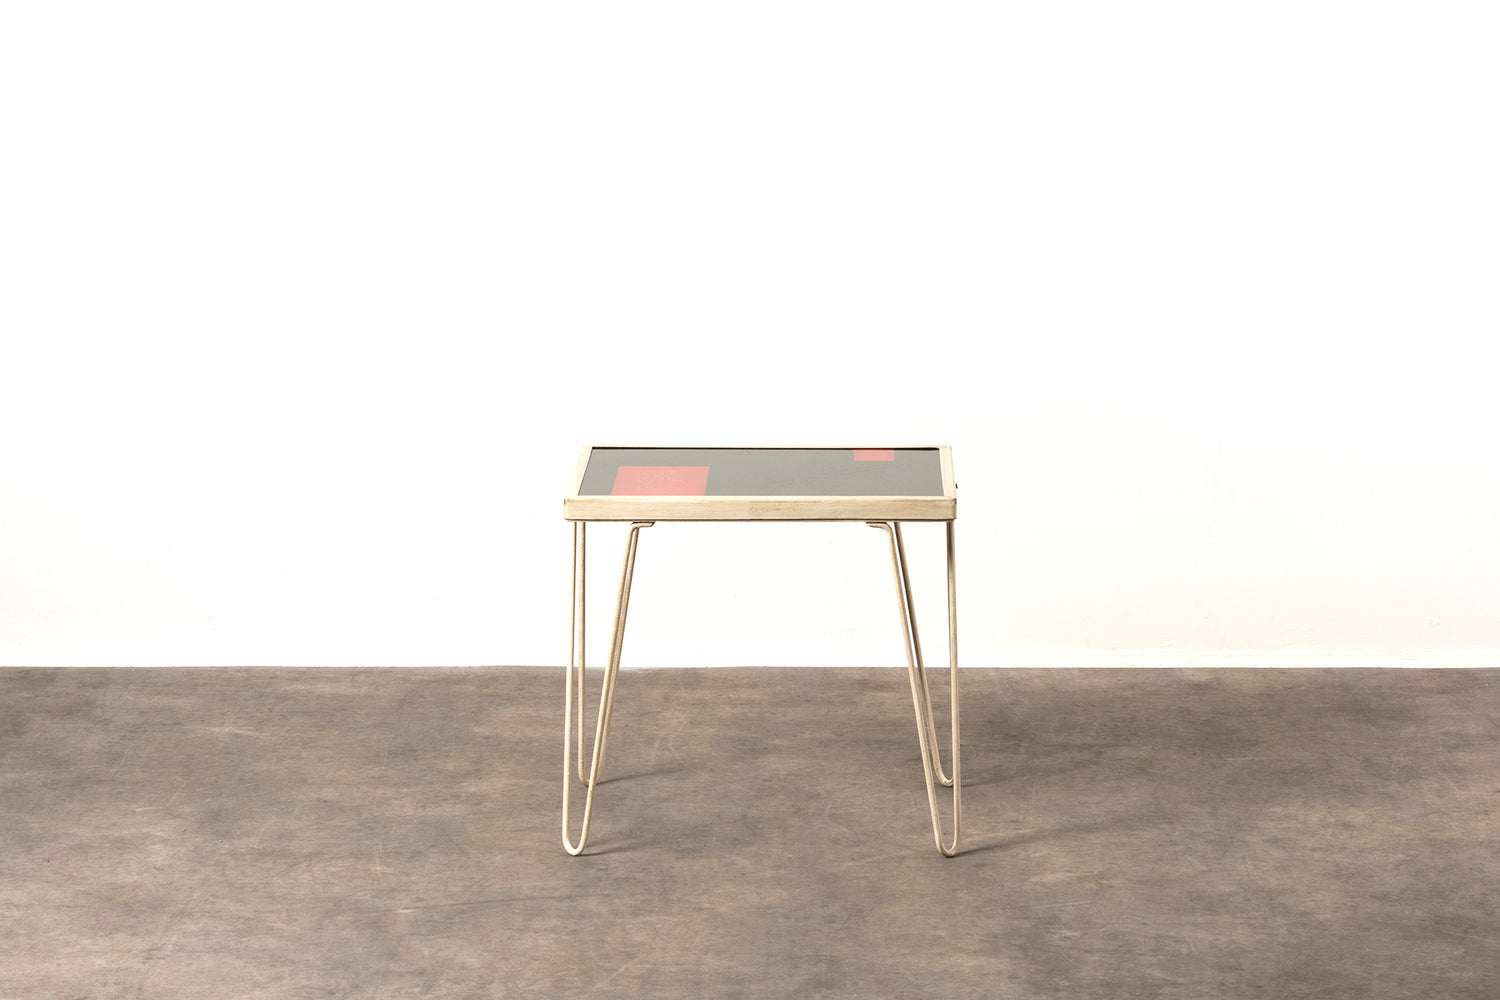 Pair of low table